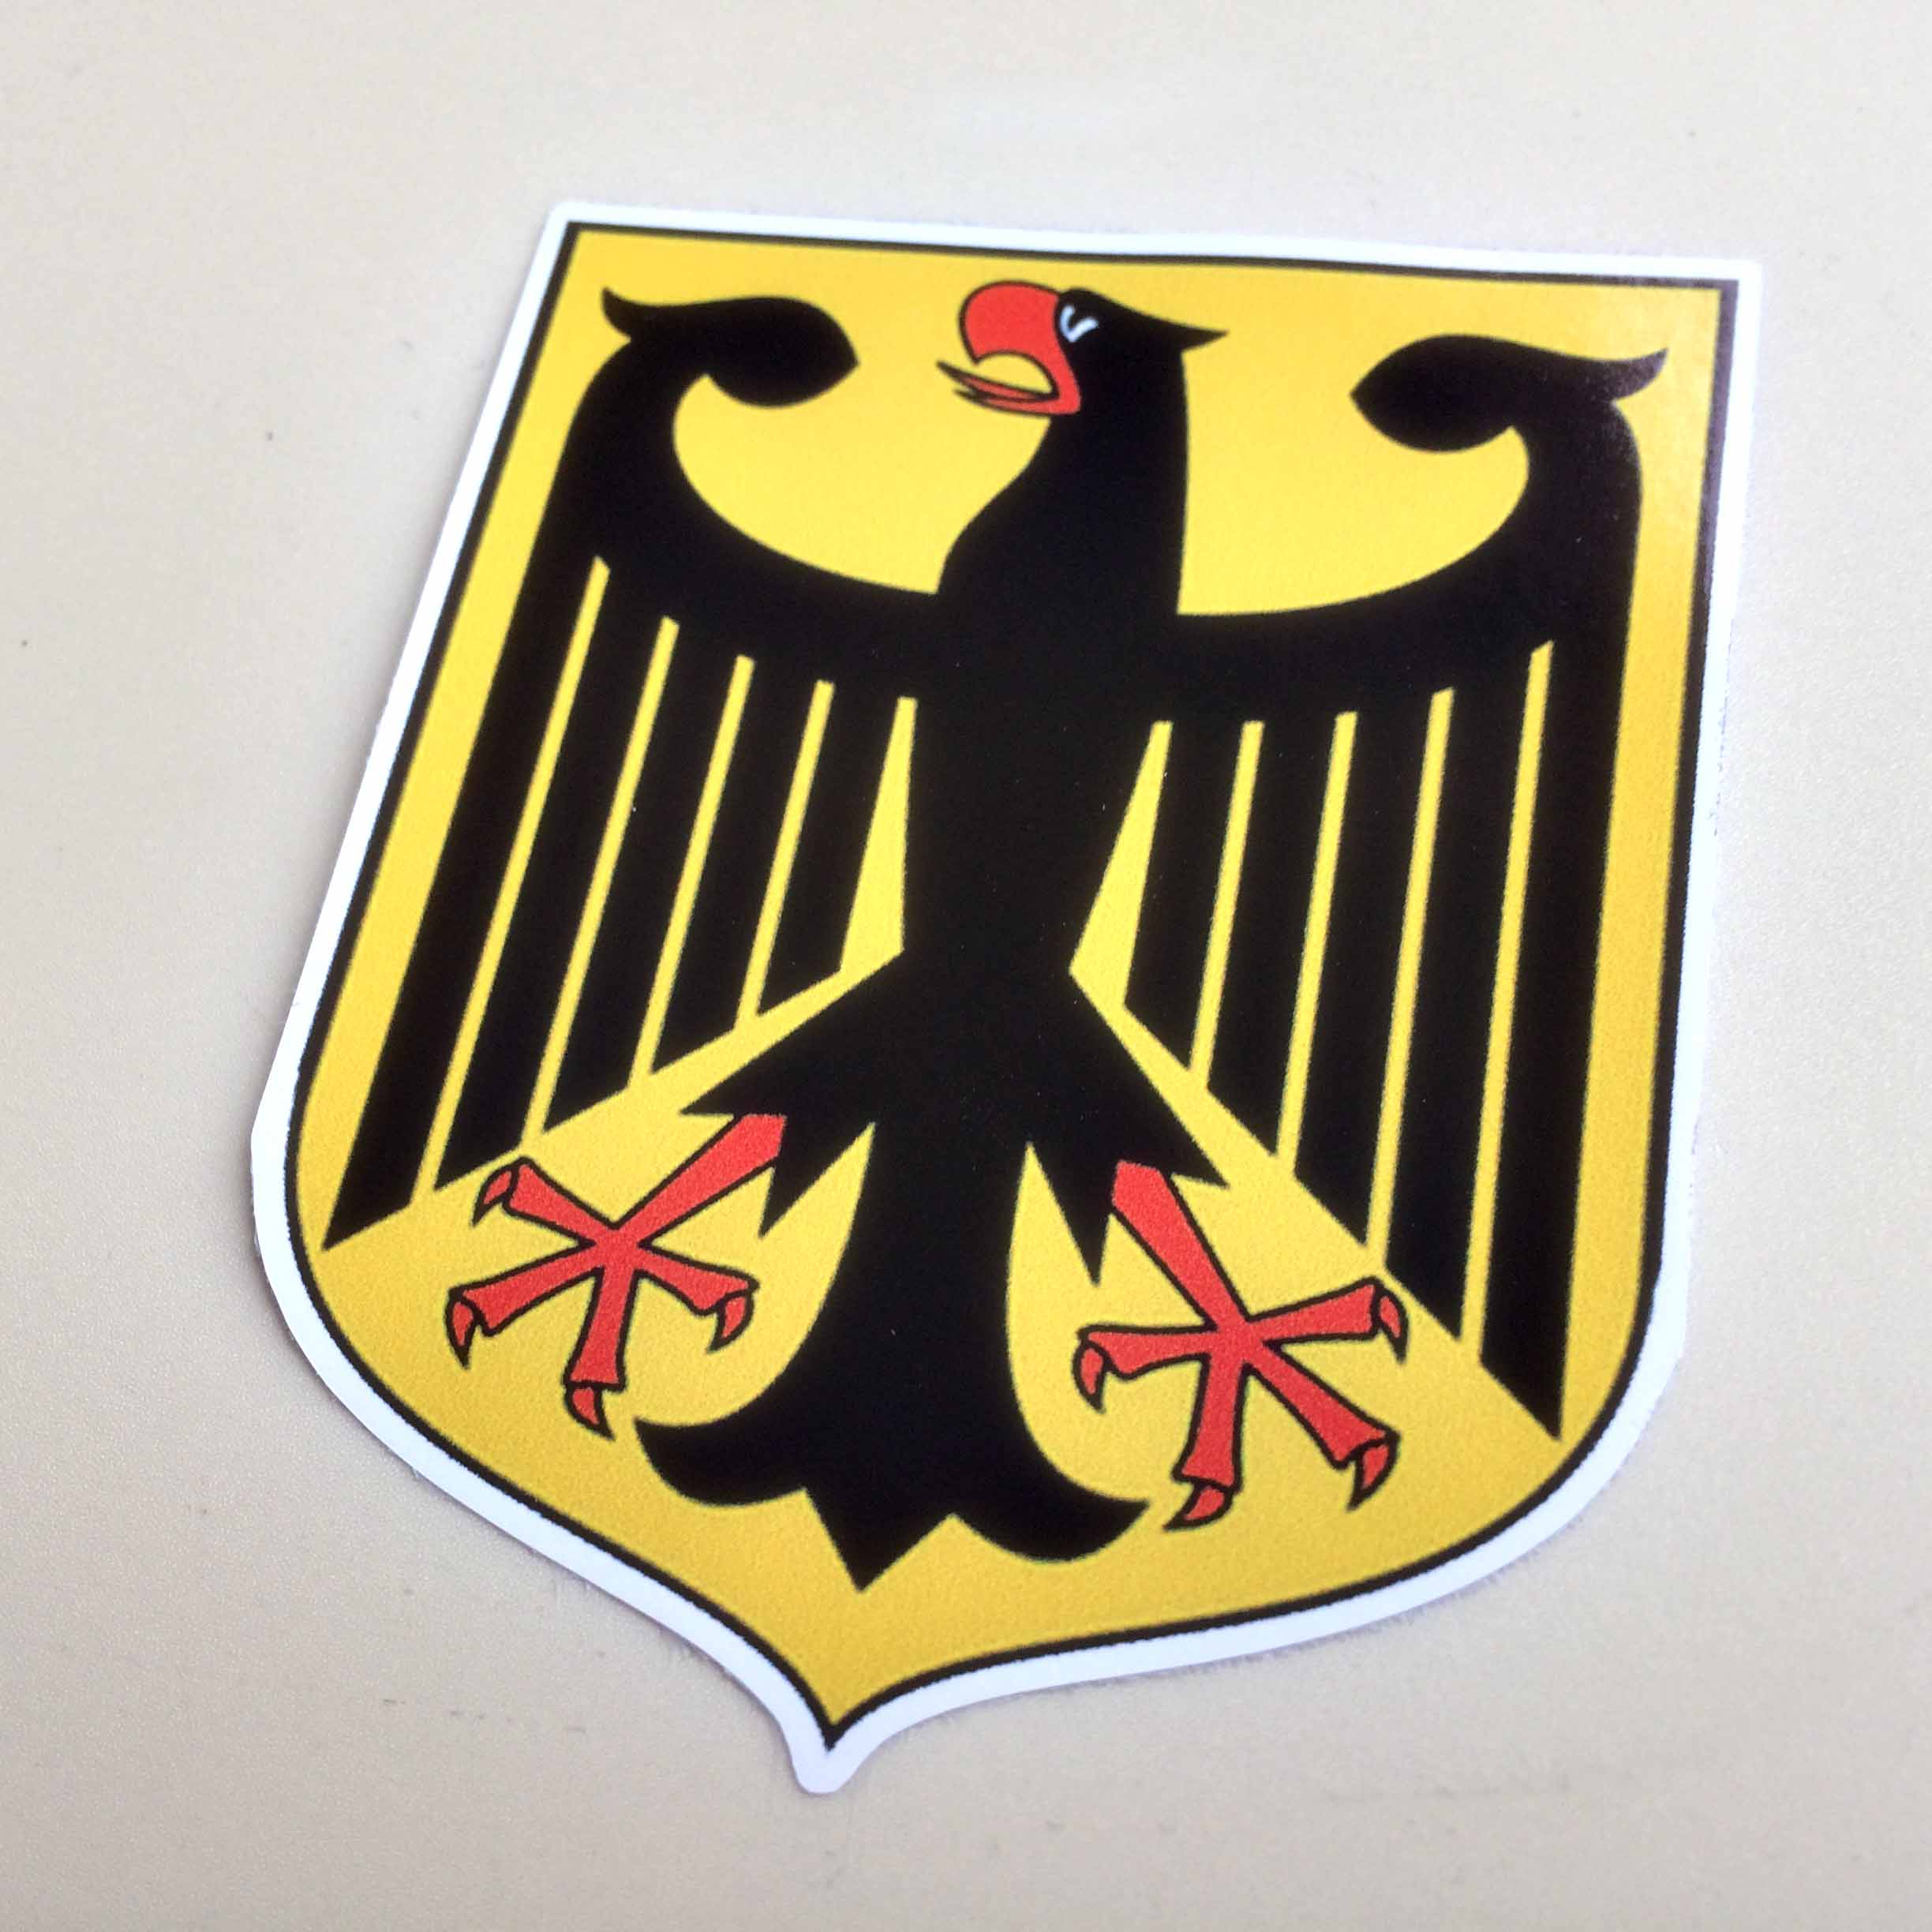 GERMAN COAT OF ARMS GERMANY EAGLE STICKER. A black eagle with a red beak, a red tongue and red talons on a golden field.